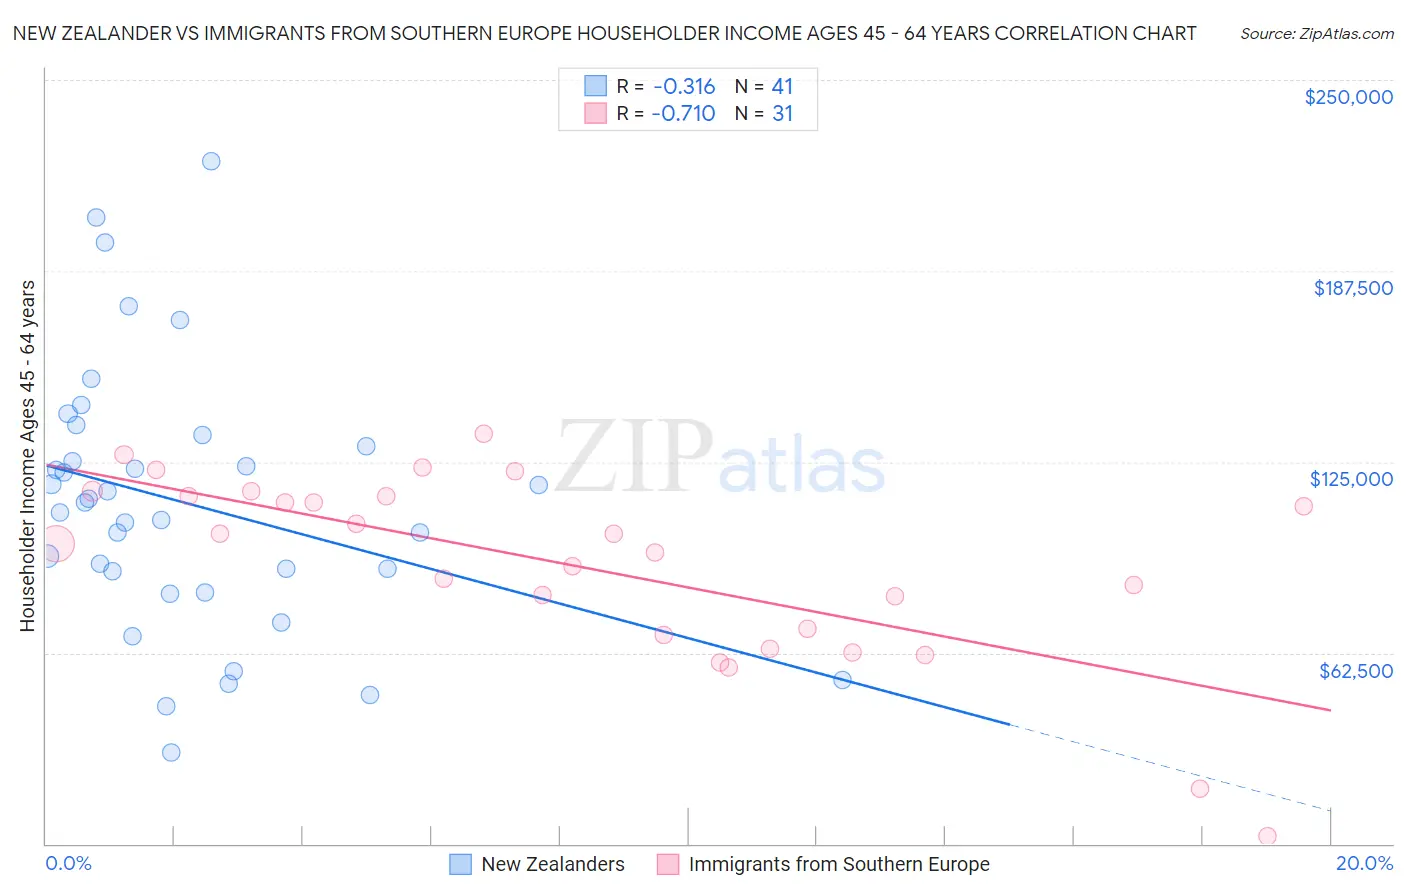 New Zealander vs Immigrants from Southern Europe Householder Income Ages 45 - 64 years